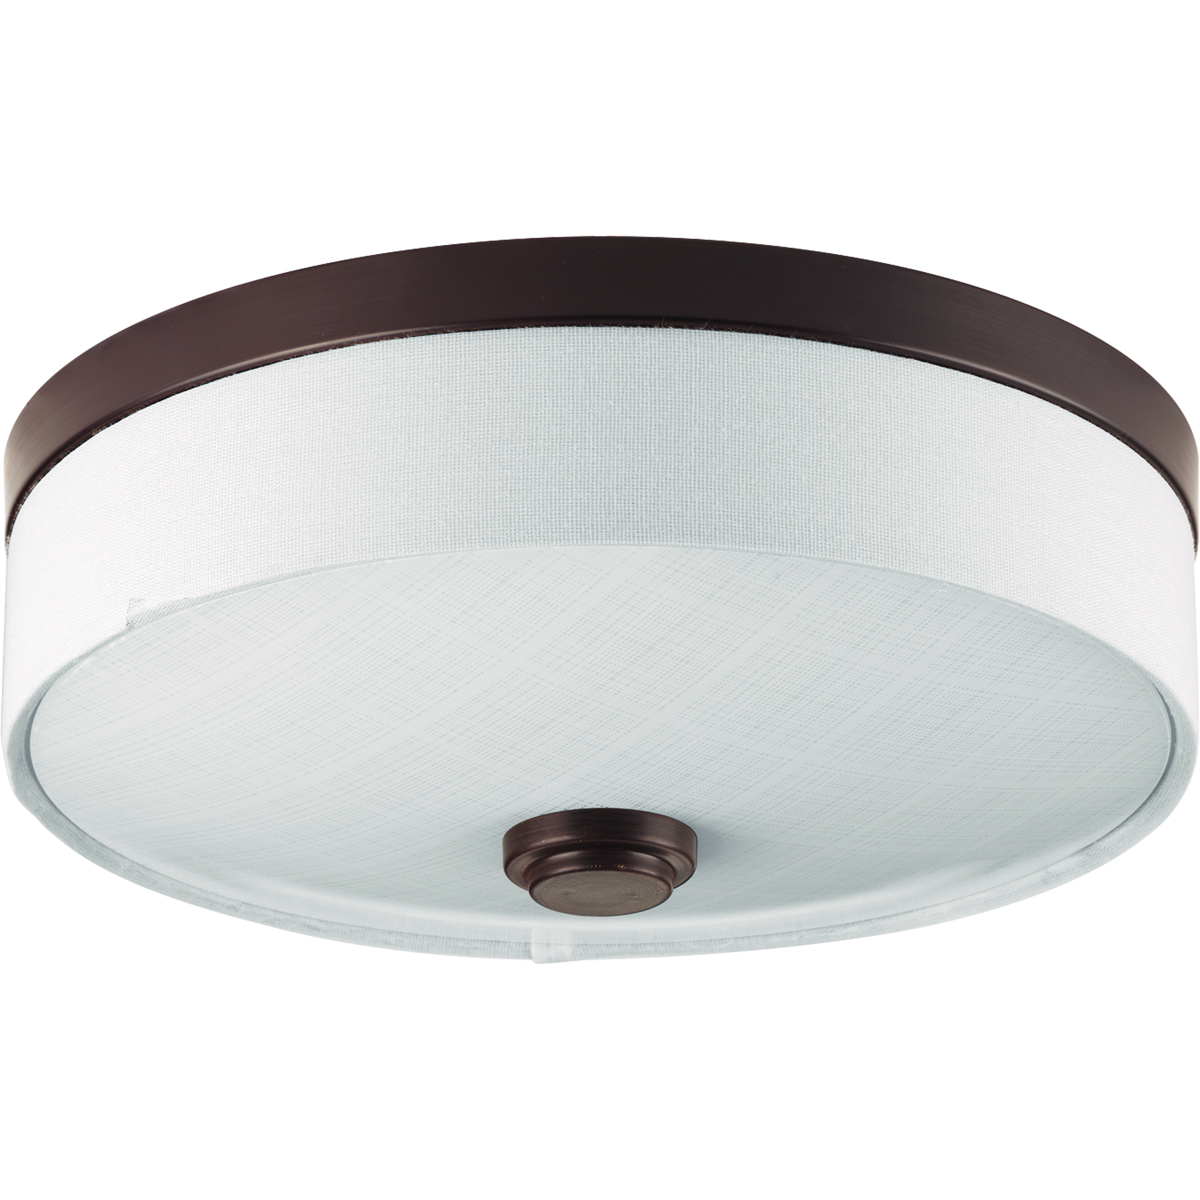 One-light LED flush mount combines a linen drum shade with a linen glass diffuser. 120V AC replaceable LED module, 1,211 lumens 71.2 lumens/watt per module (source). 3000K color temperature and 90+ CRI.